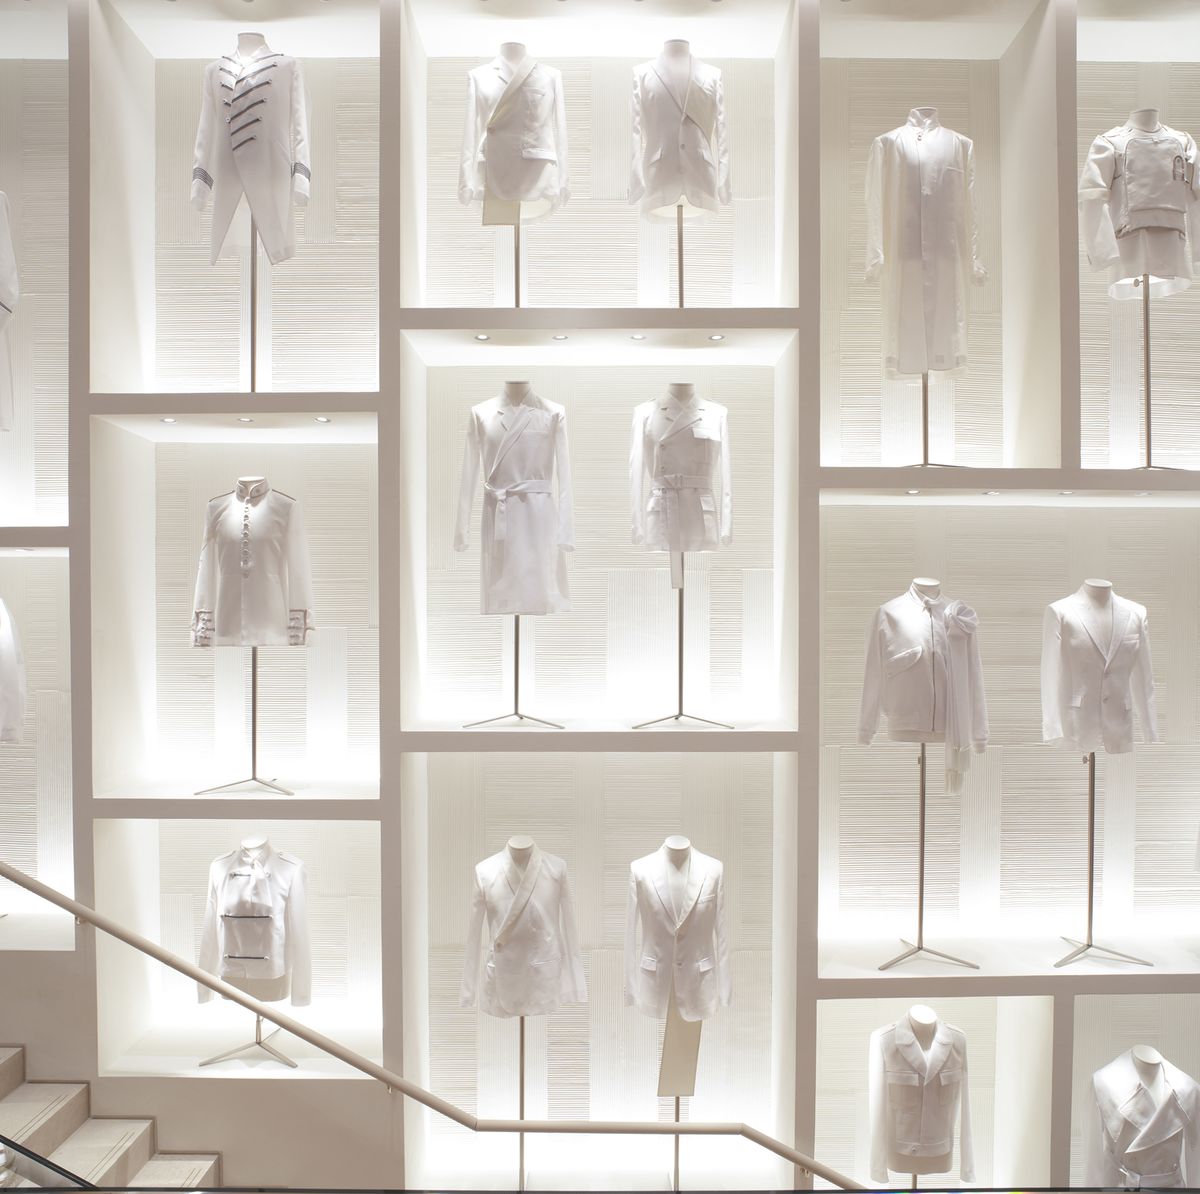 The Strategy Behind Dior's New Megastore